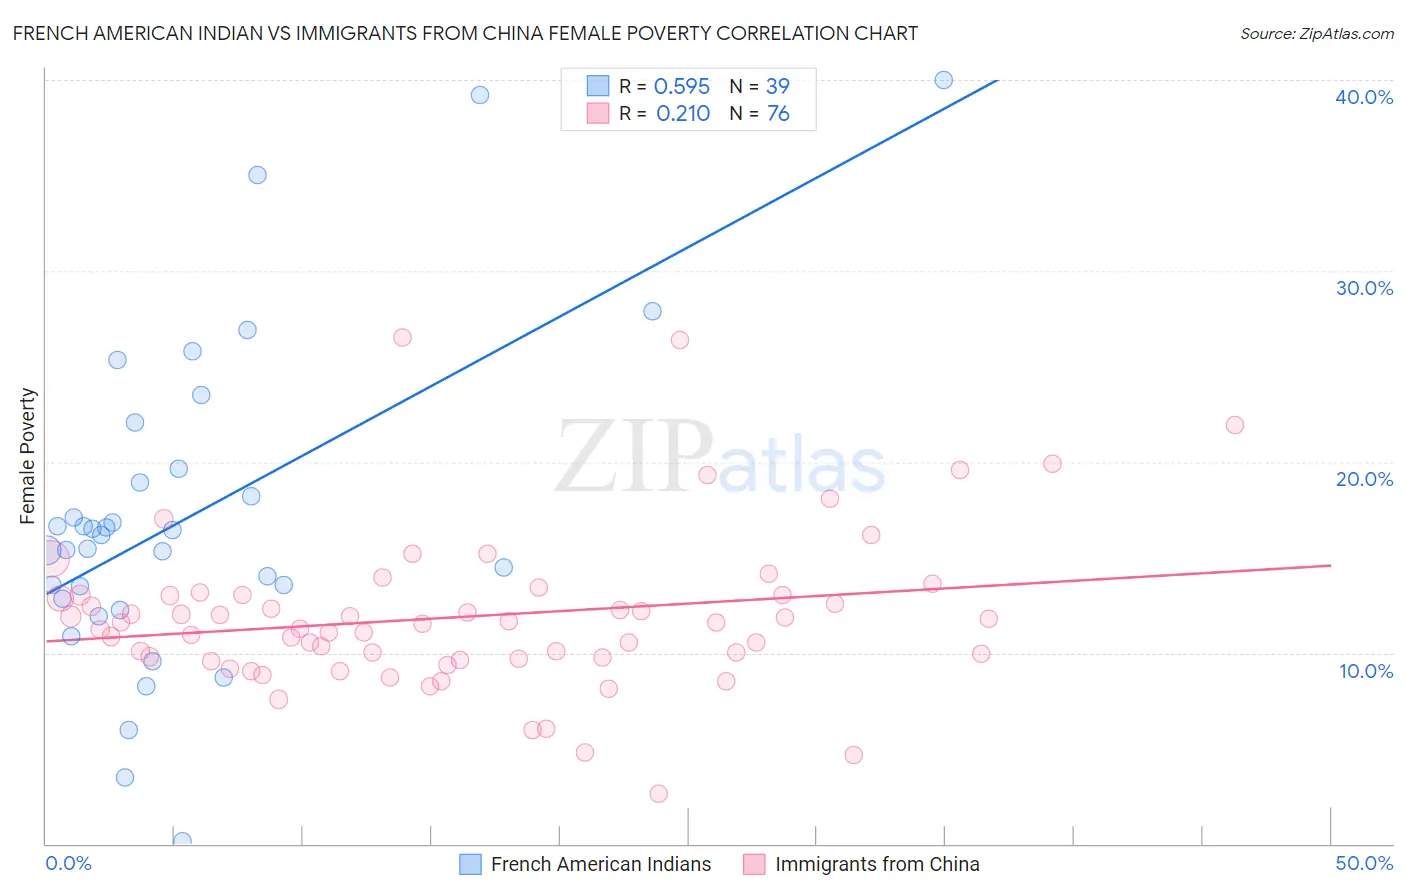 French American Indian vs Immigrants from China Female Poverty